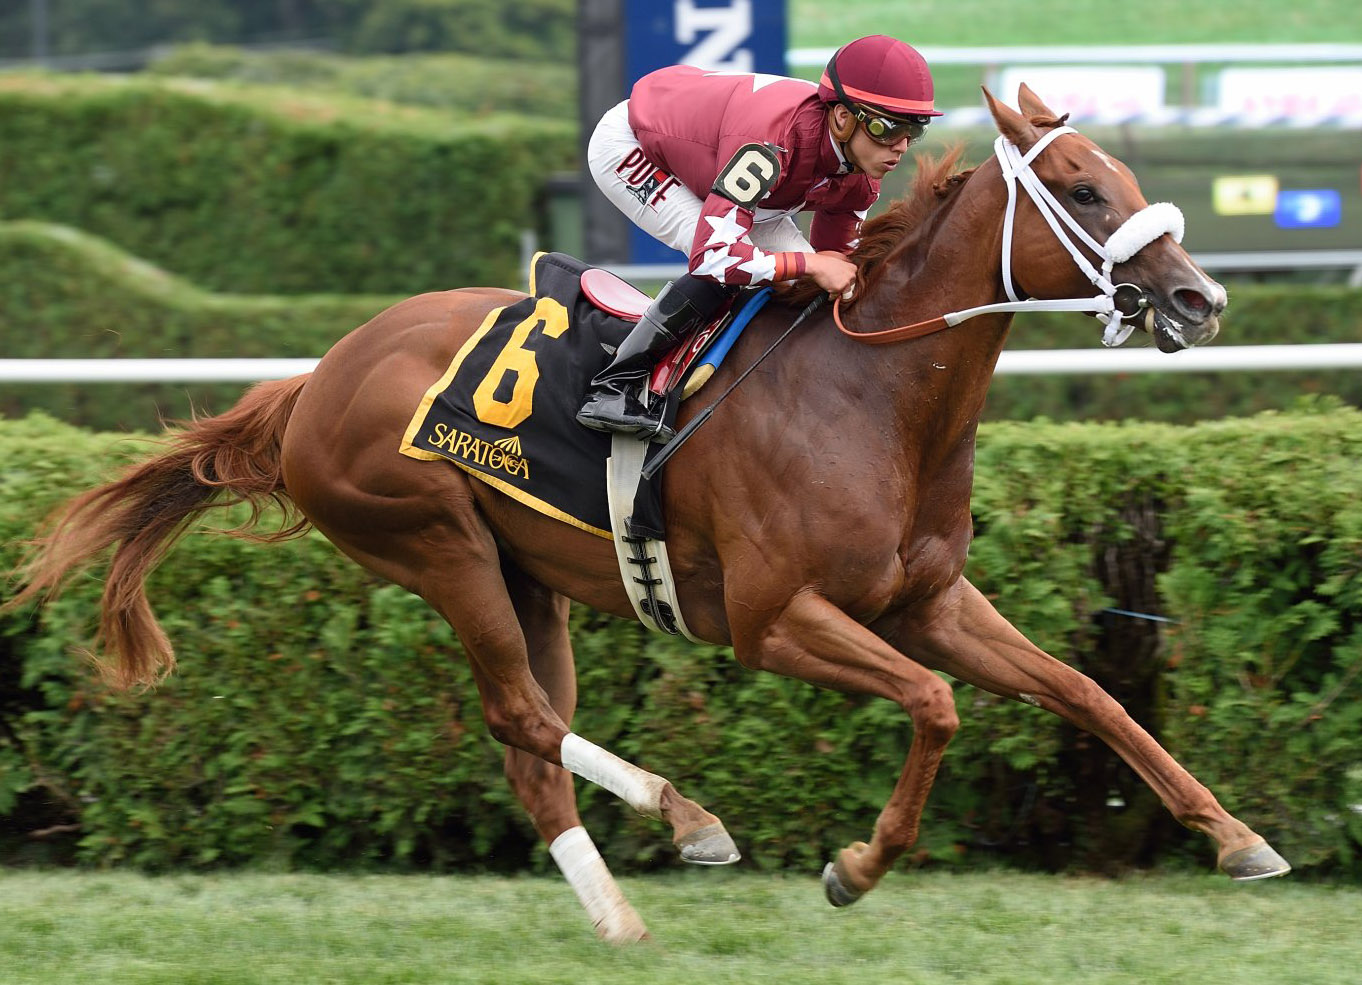 Lady Shipman winning at Saratoga (photo by Chelsea Durand of Thoroughbred Daily News)